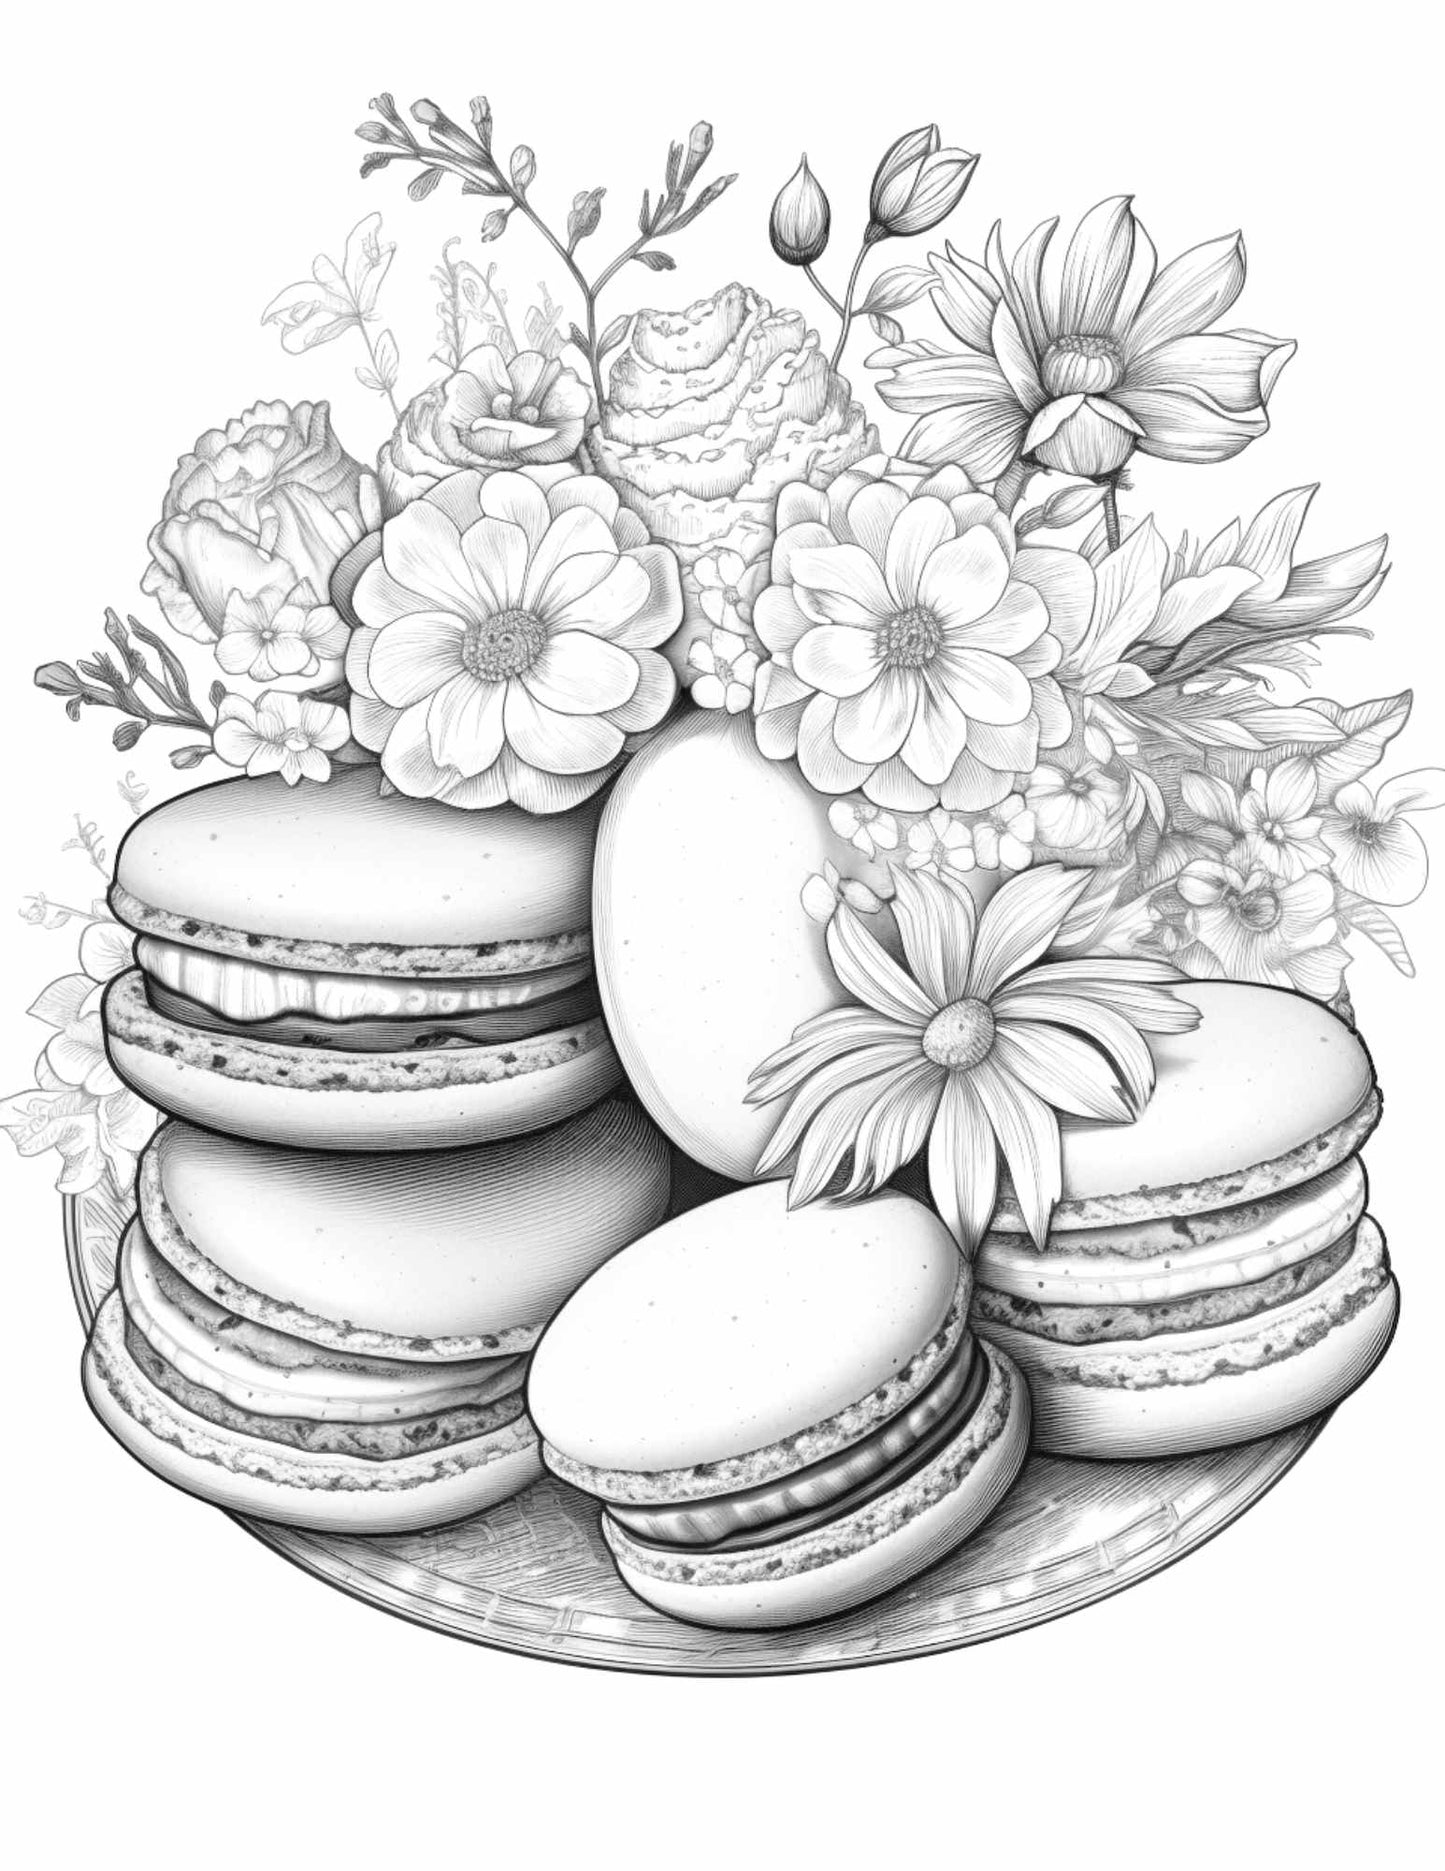 vintage macarons grayscale coloring pages, printable coloring pages for adults, free coloring pages, grayscale art, macarons coloring